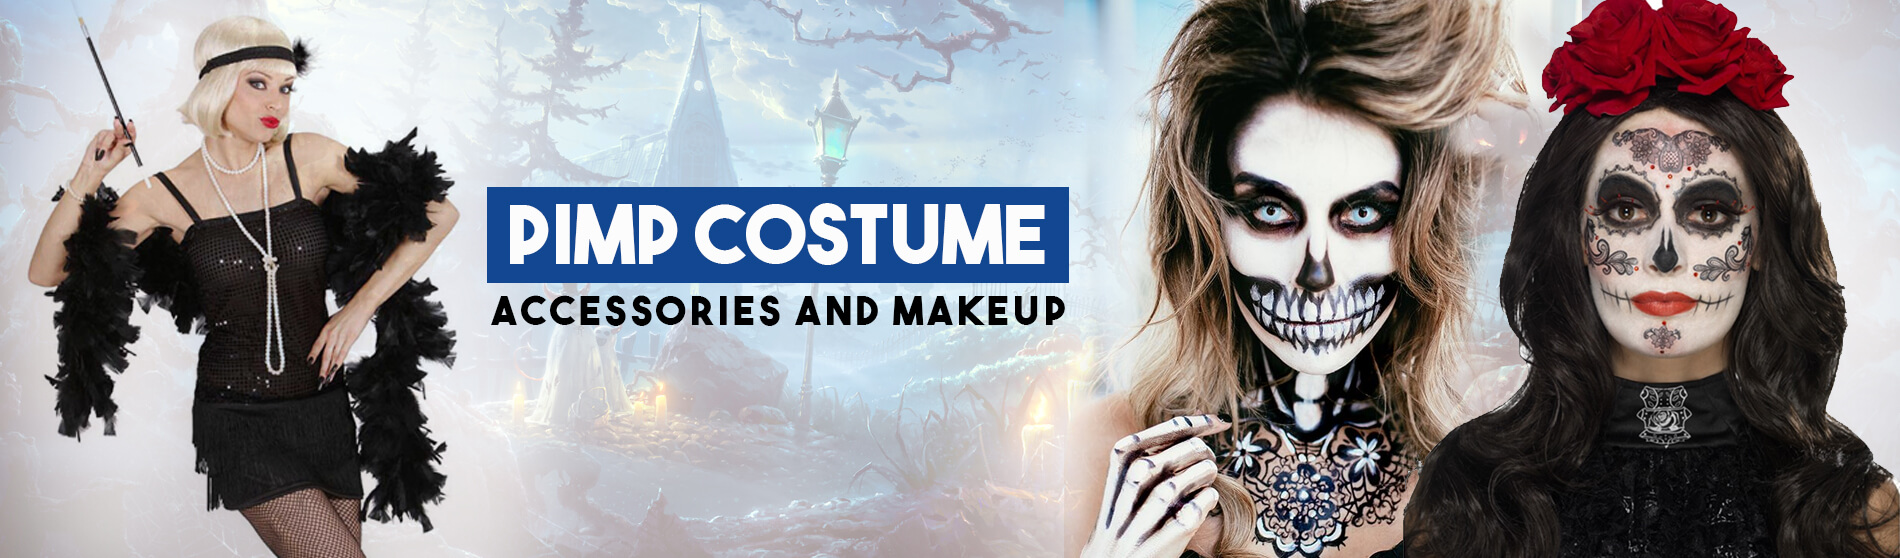 Glendale Halloween : Pimp Costume Accessories and Makeup